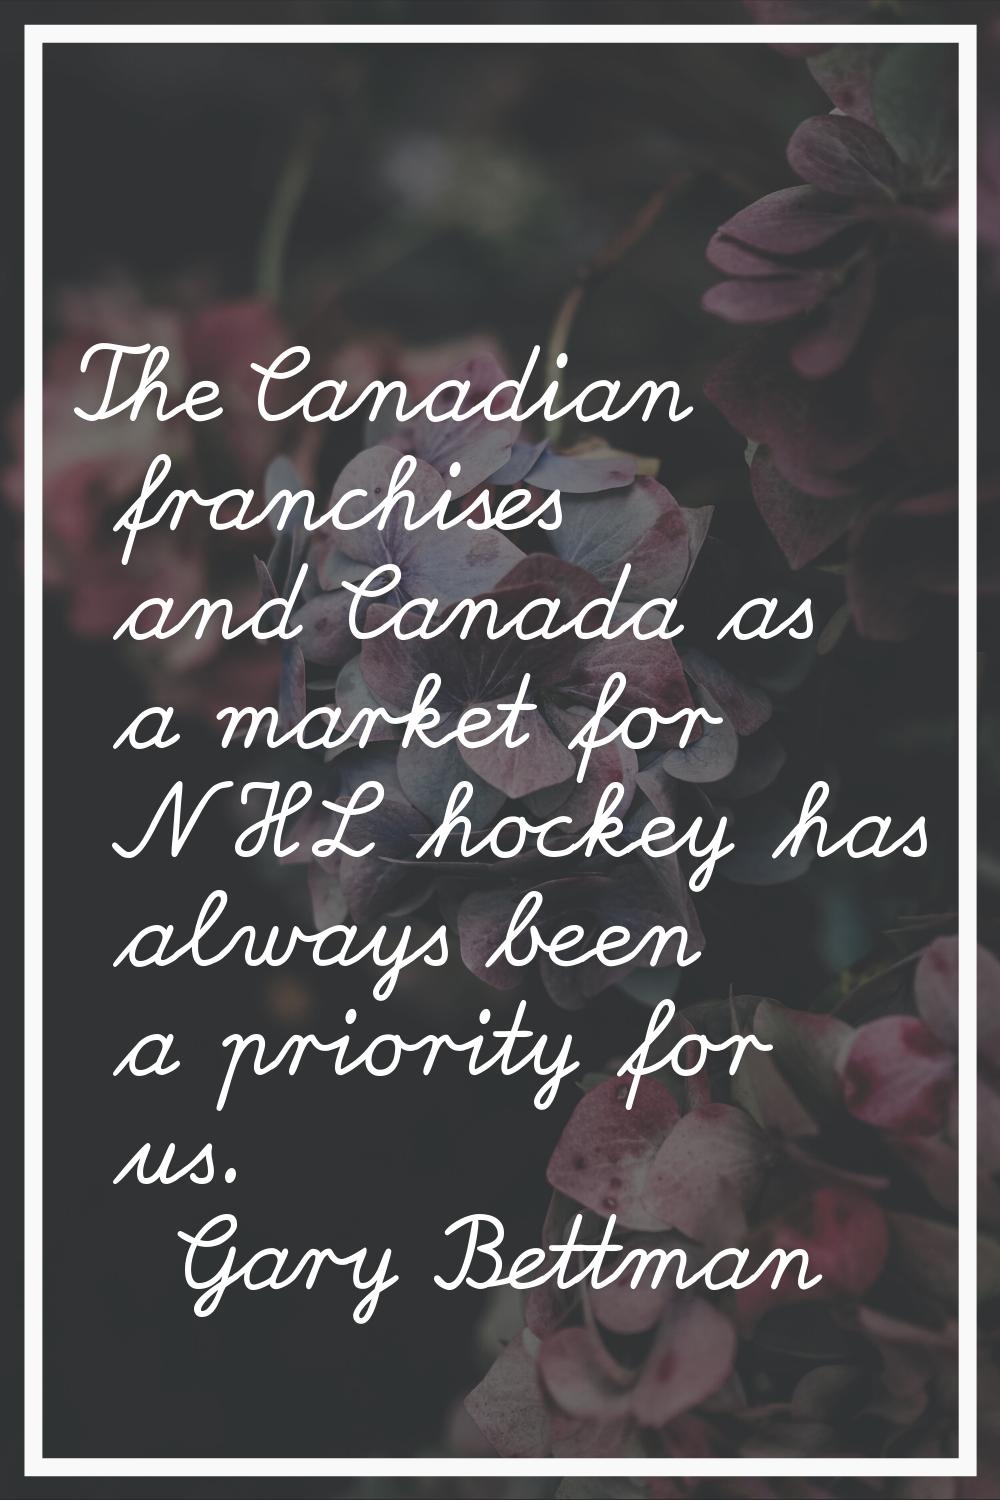 The Canadian franchises and Canada as a market for NHL hockey has always been a priority for us.